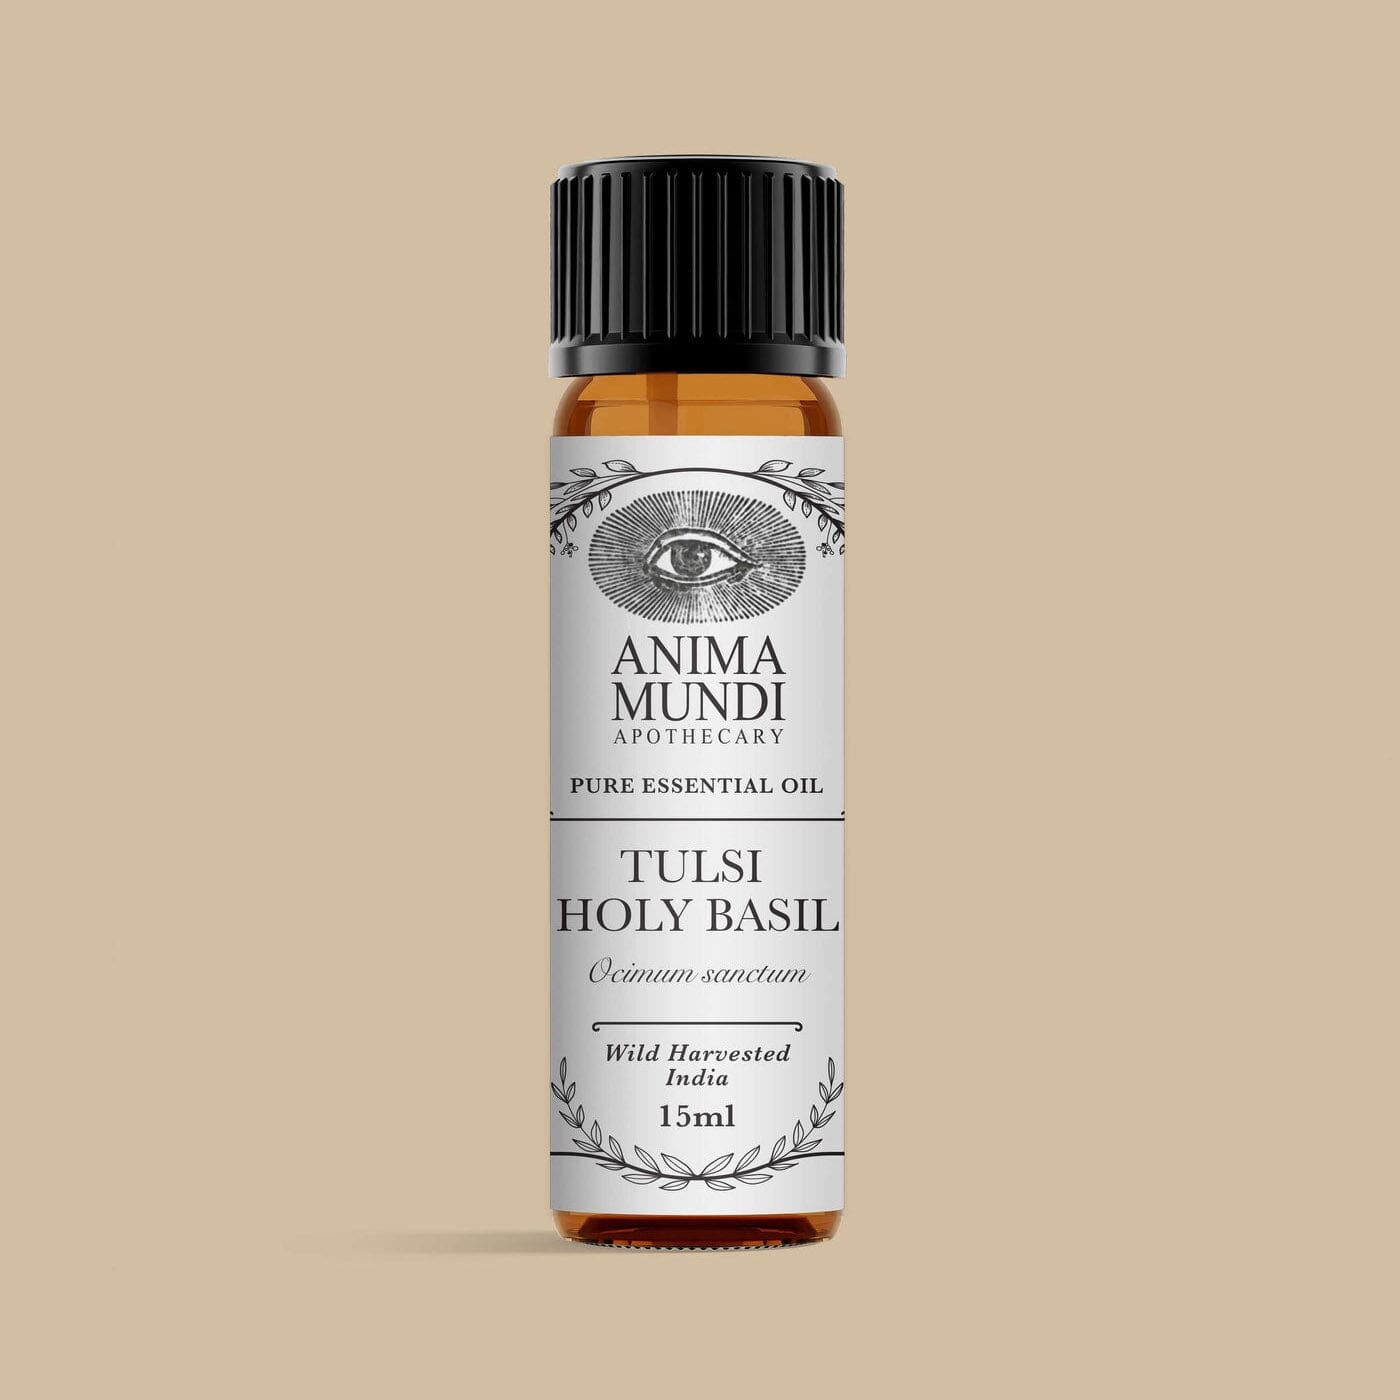 TULSI (HOLY BASIL) Essential Oil | Sustainably Cultivated Ätherische Öle Anima Mundi Apothecary - Genuine Selection